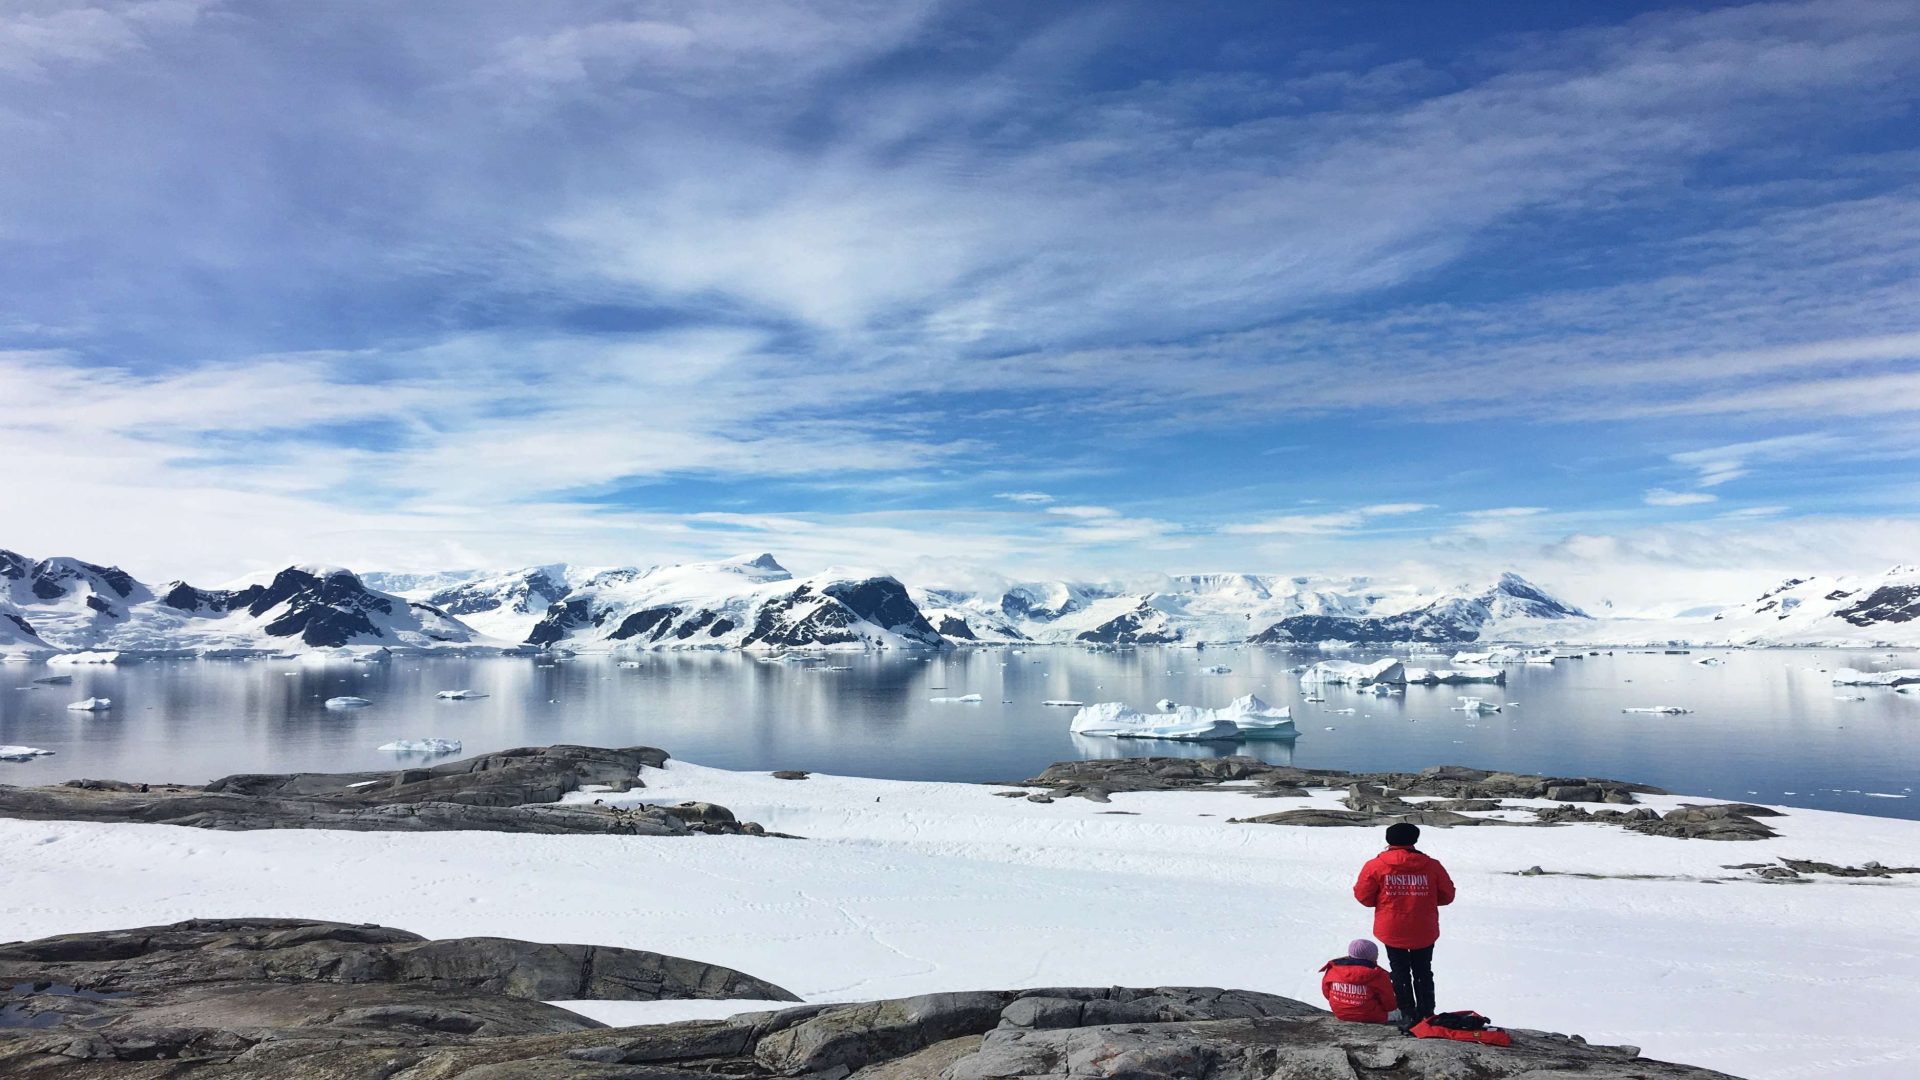 The conservation conundrum: Should Antarctica be on the ‘no’ list?